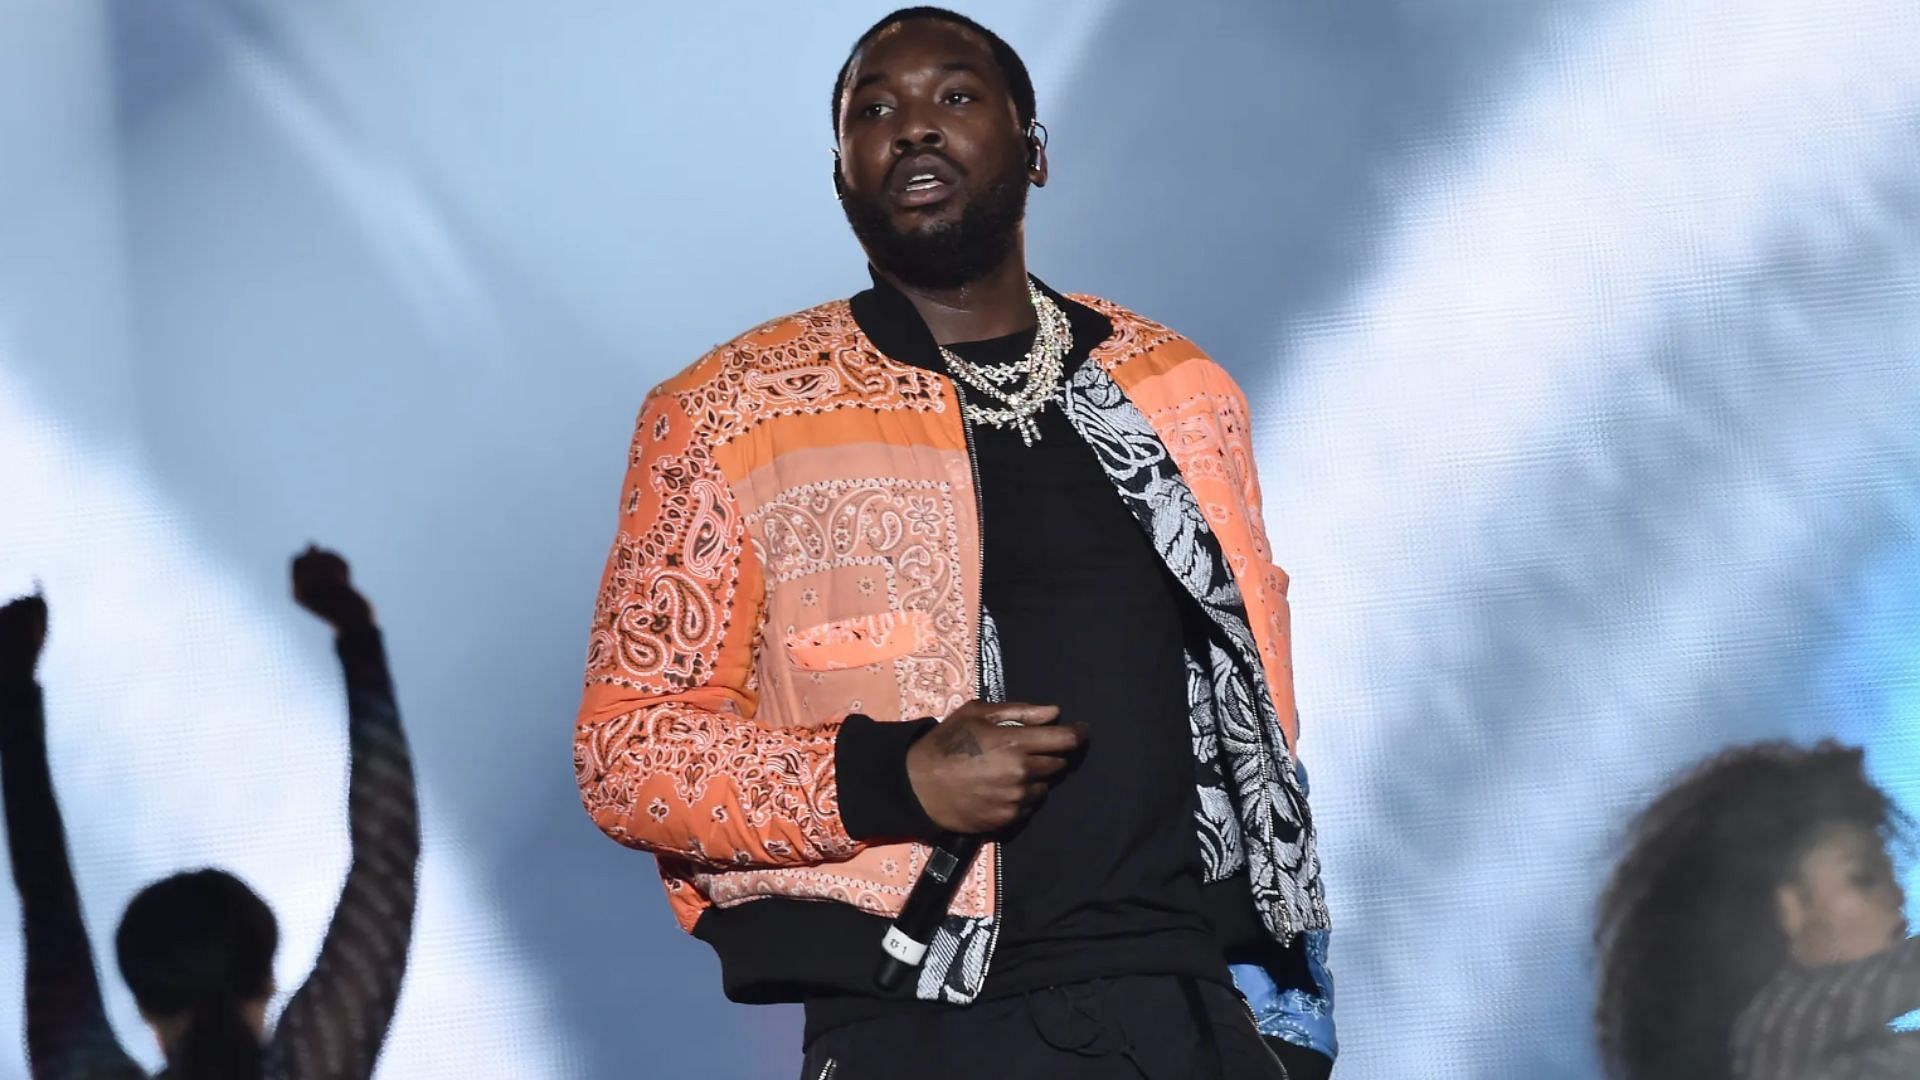 Meek Mill Wells Fargo center concert: Tickets, where to buy, price and more